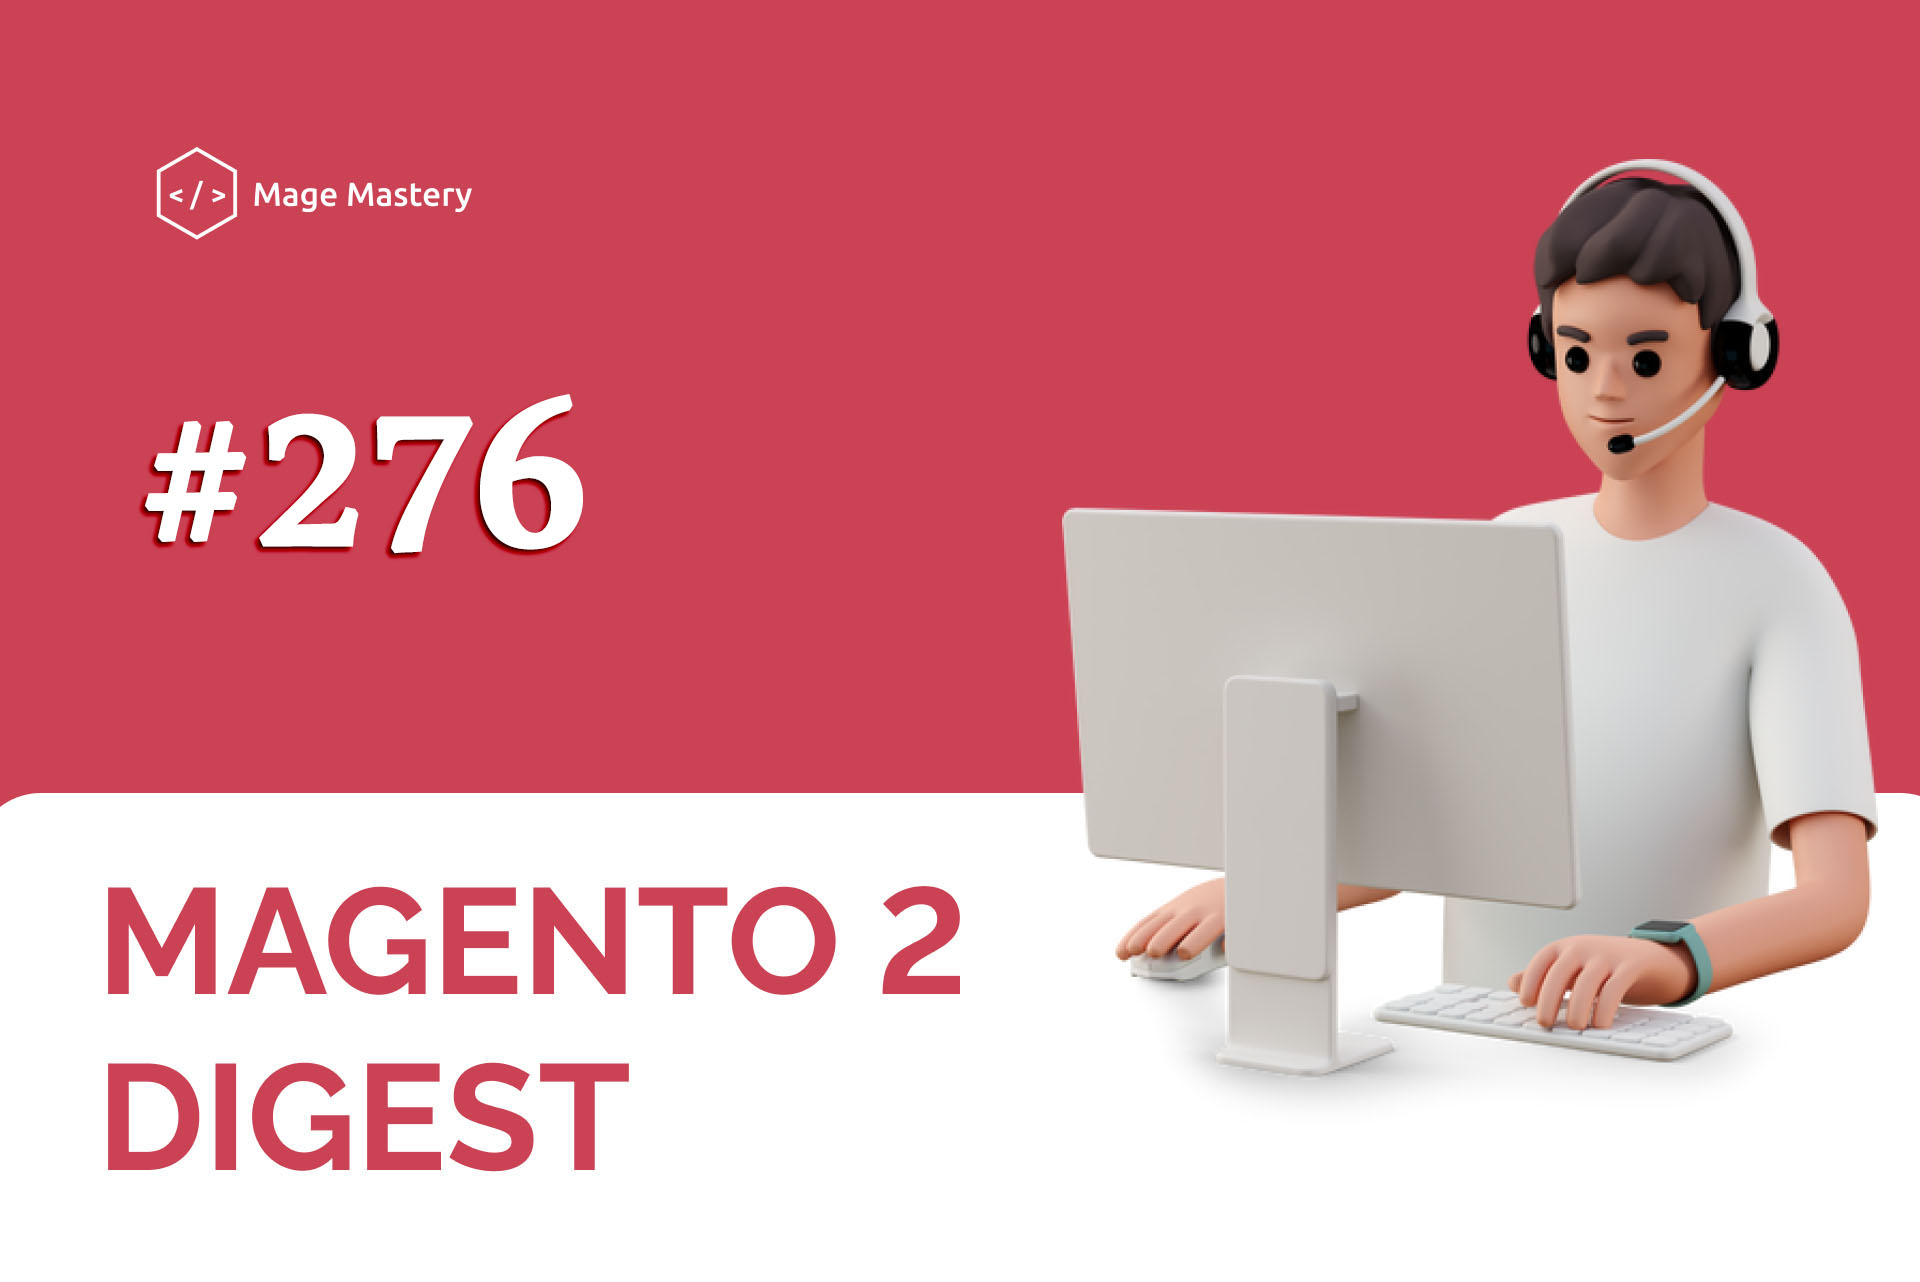 The Magento 2 Tech Digest is the biggest collection of resources dedicated to Magento development and related topics. Here, you can find opinions and recommendations from Magento professionals, various how-tos, product reviews, event announcements, video 